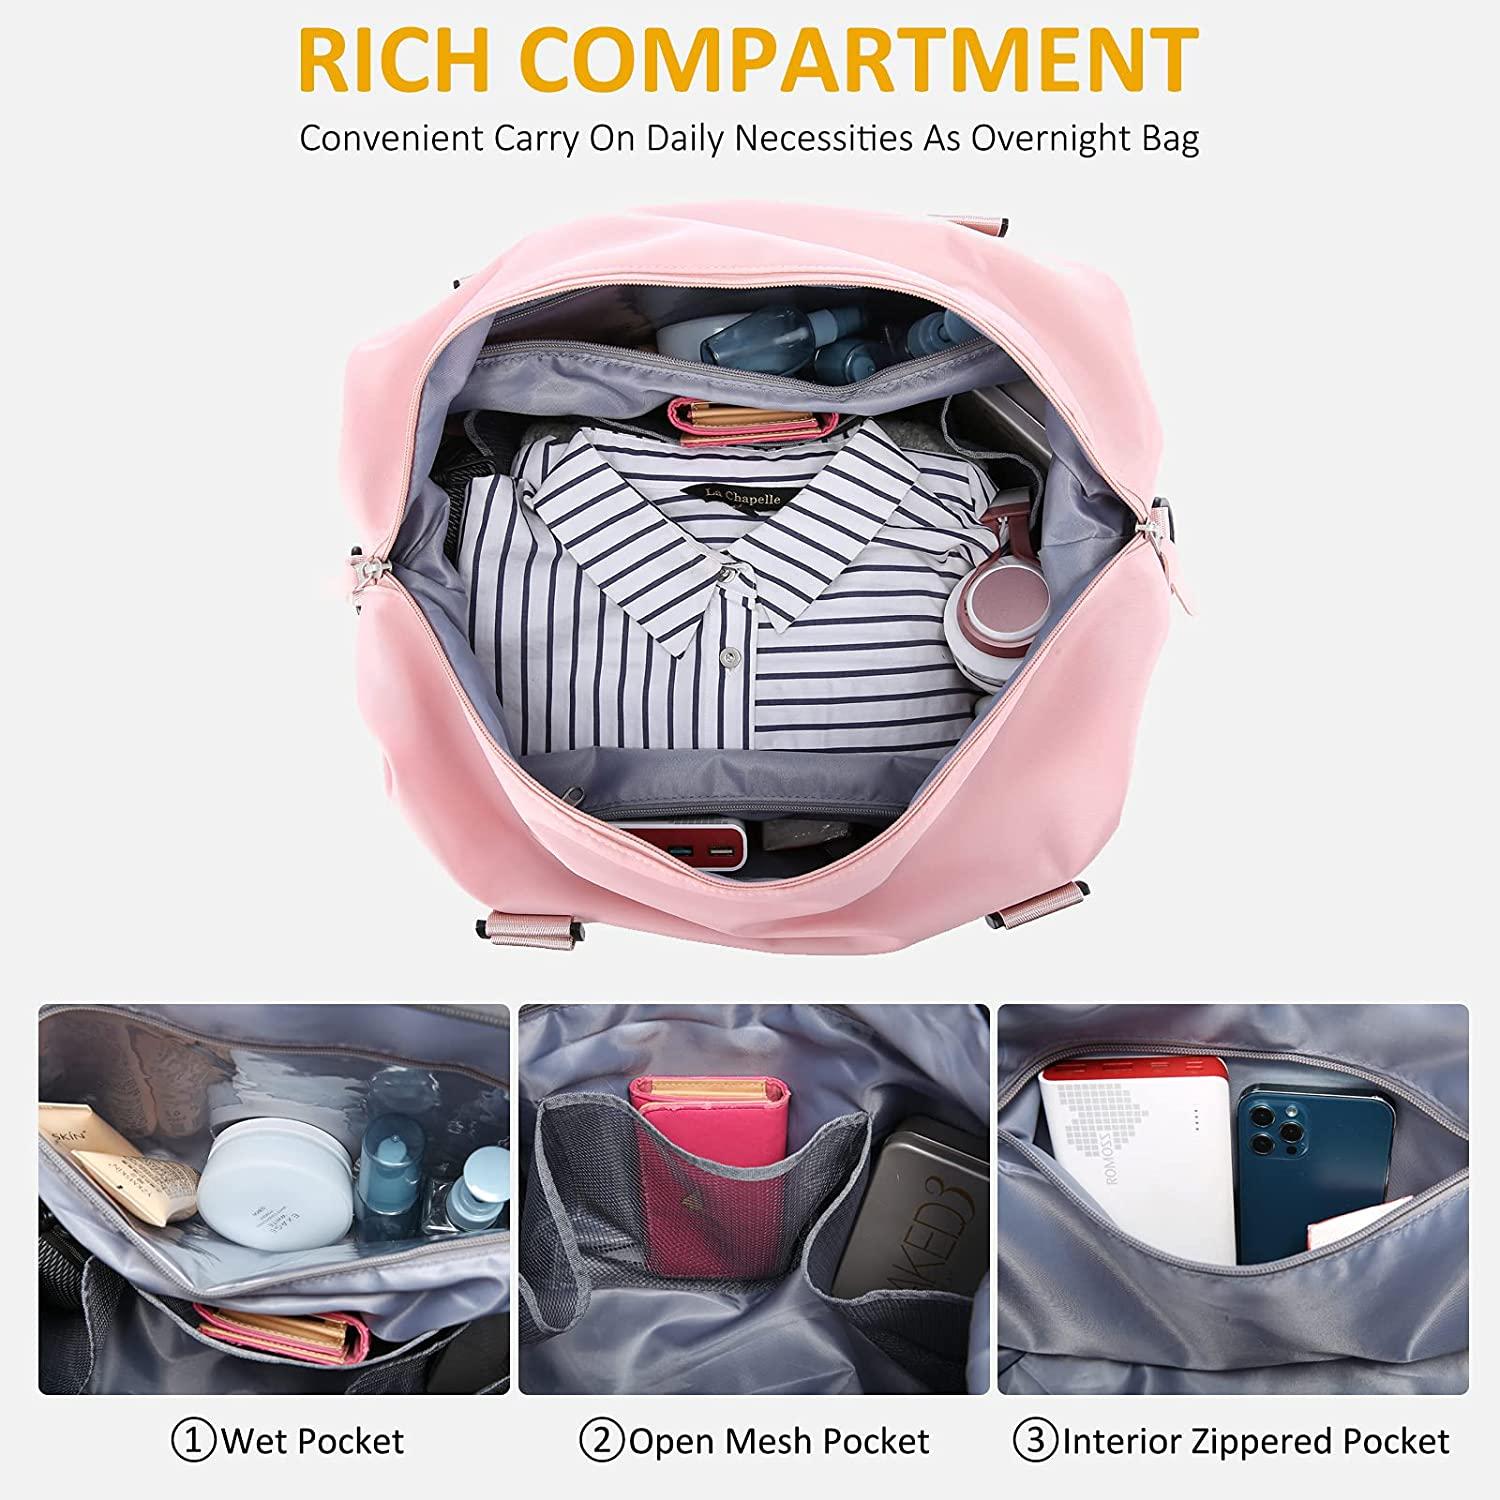 Duffle Bag for Travel, Weekender Bag with Shoe Compartment, Carry On  Overnight Bag for Women with Toiletry Bag, 50L Gym Bag with Wet Pocket,  Hospital